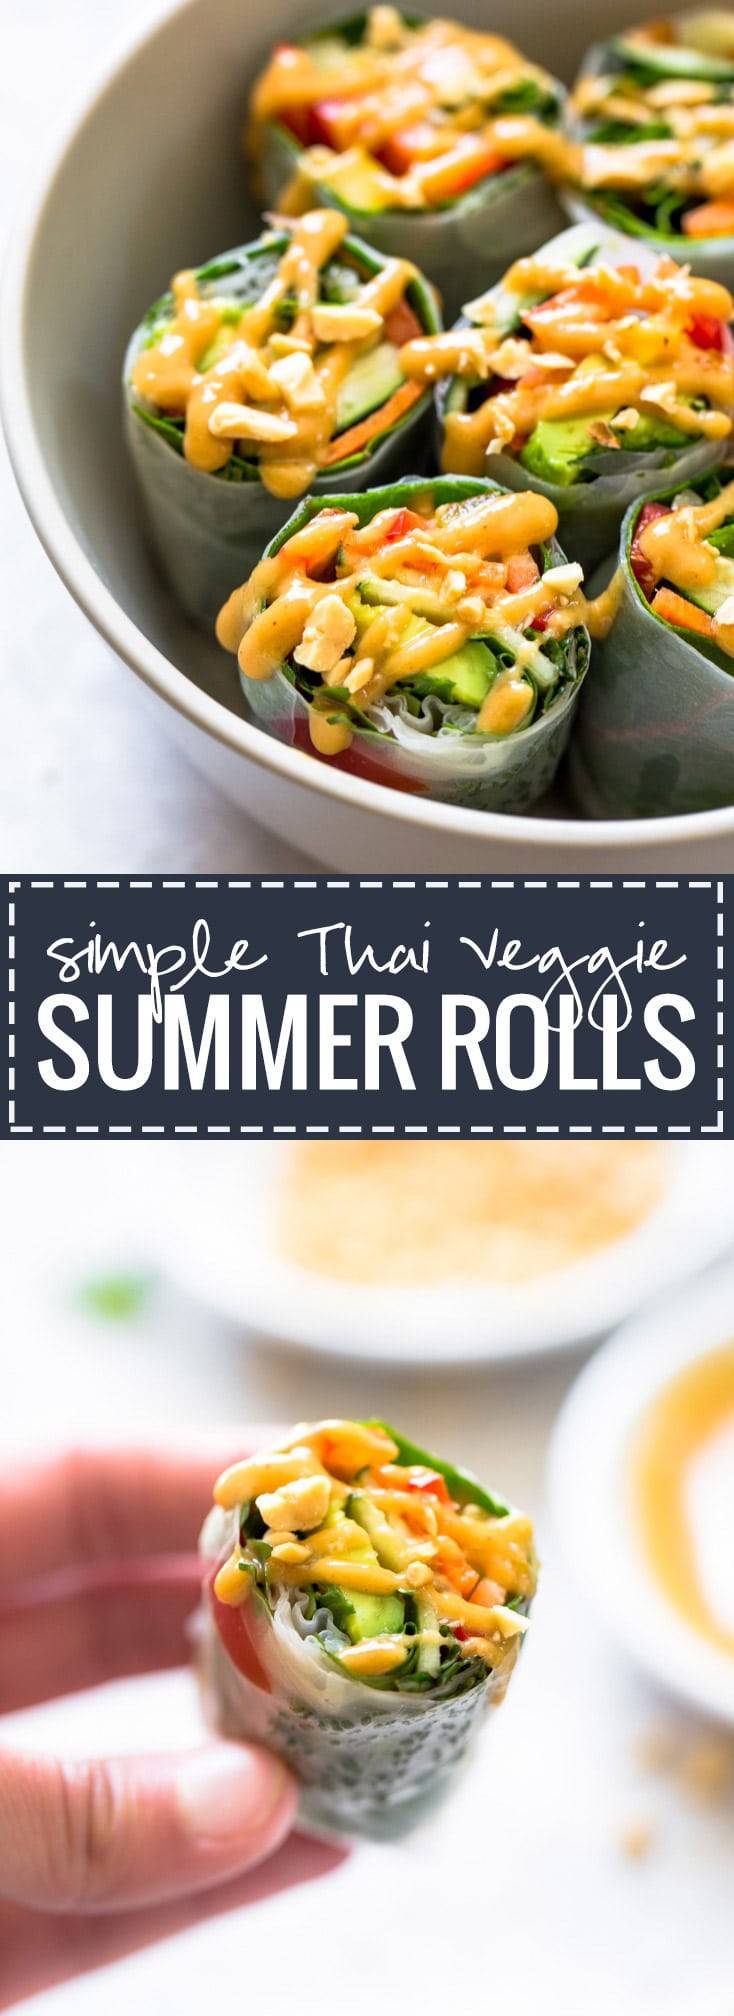 Thai Summer Rolls with Peanut Sauce - a SUPER yummy, healthy, and portable lunch idea! Also: THAT SAUCE. ♡ Vegan. | pinchofyum.com